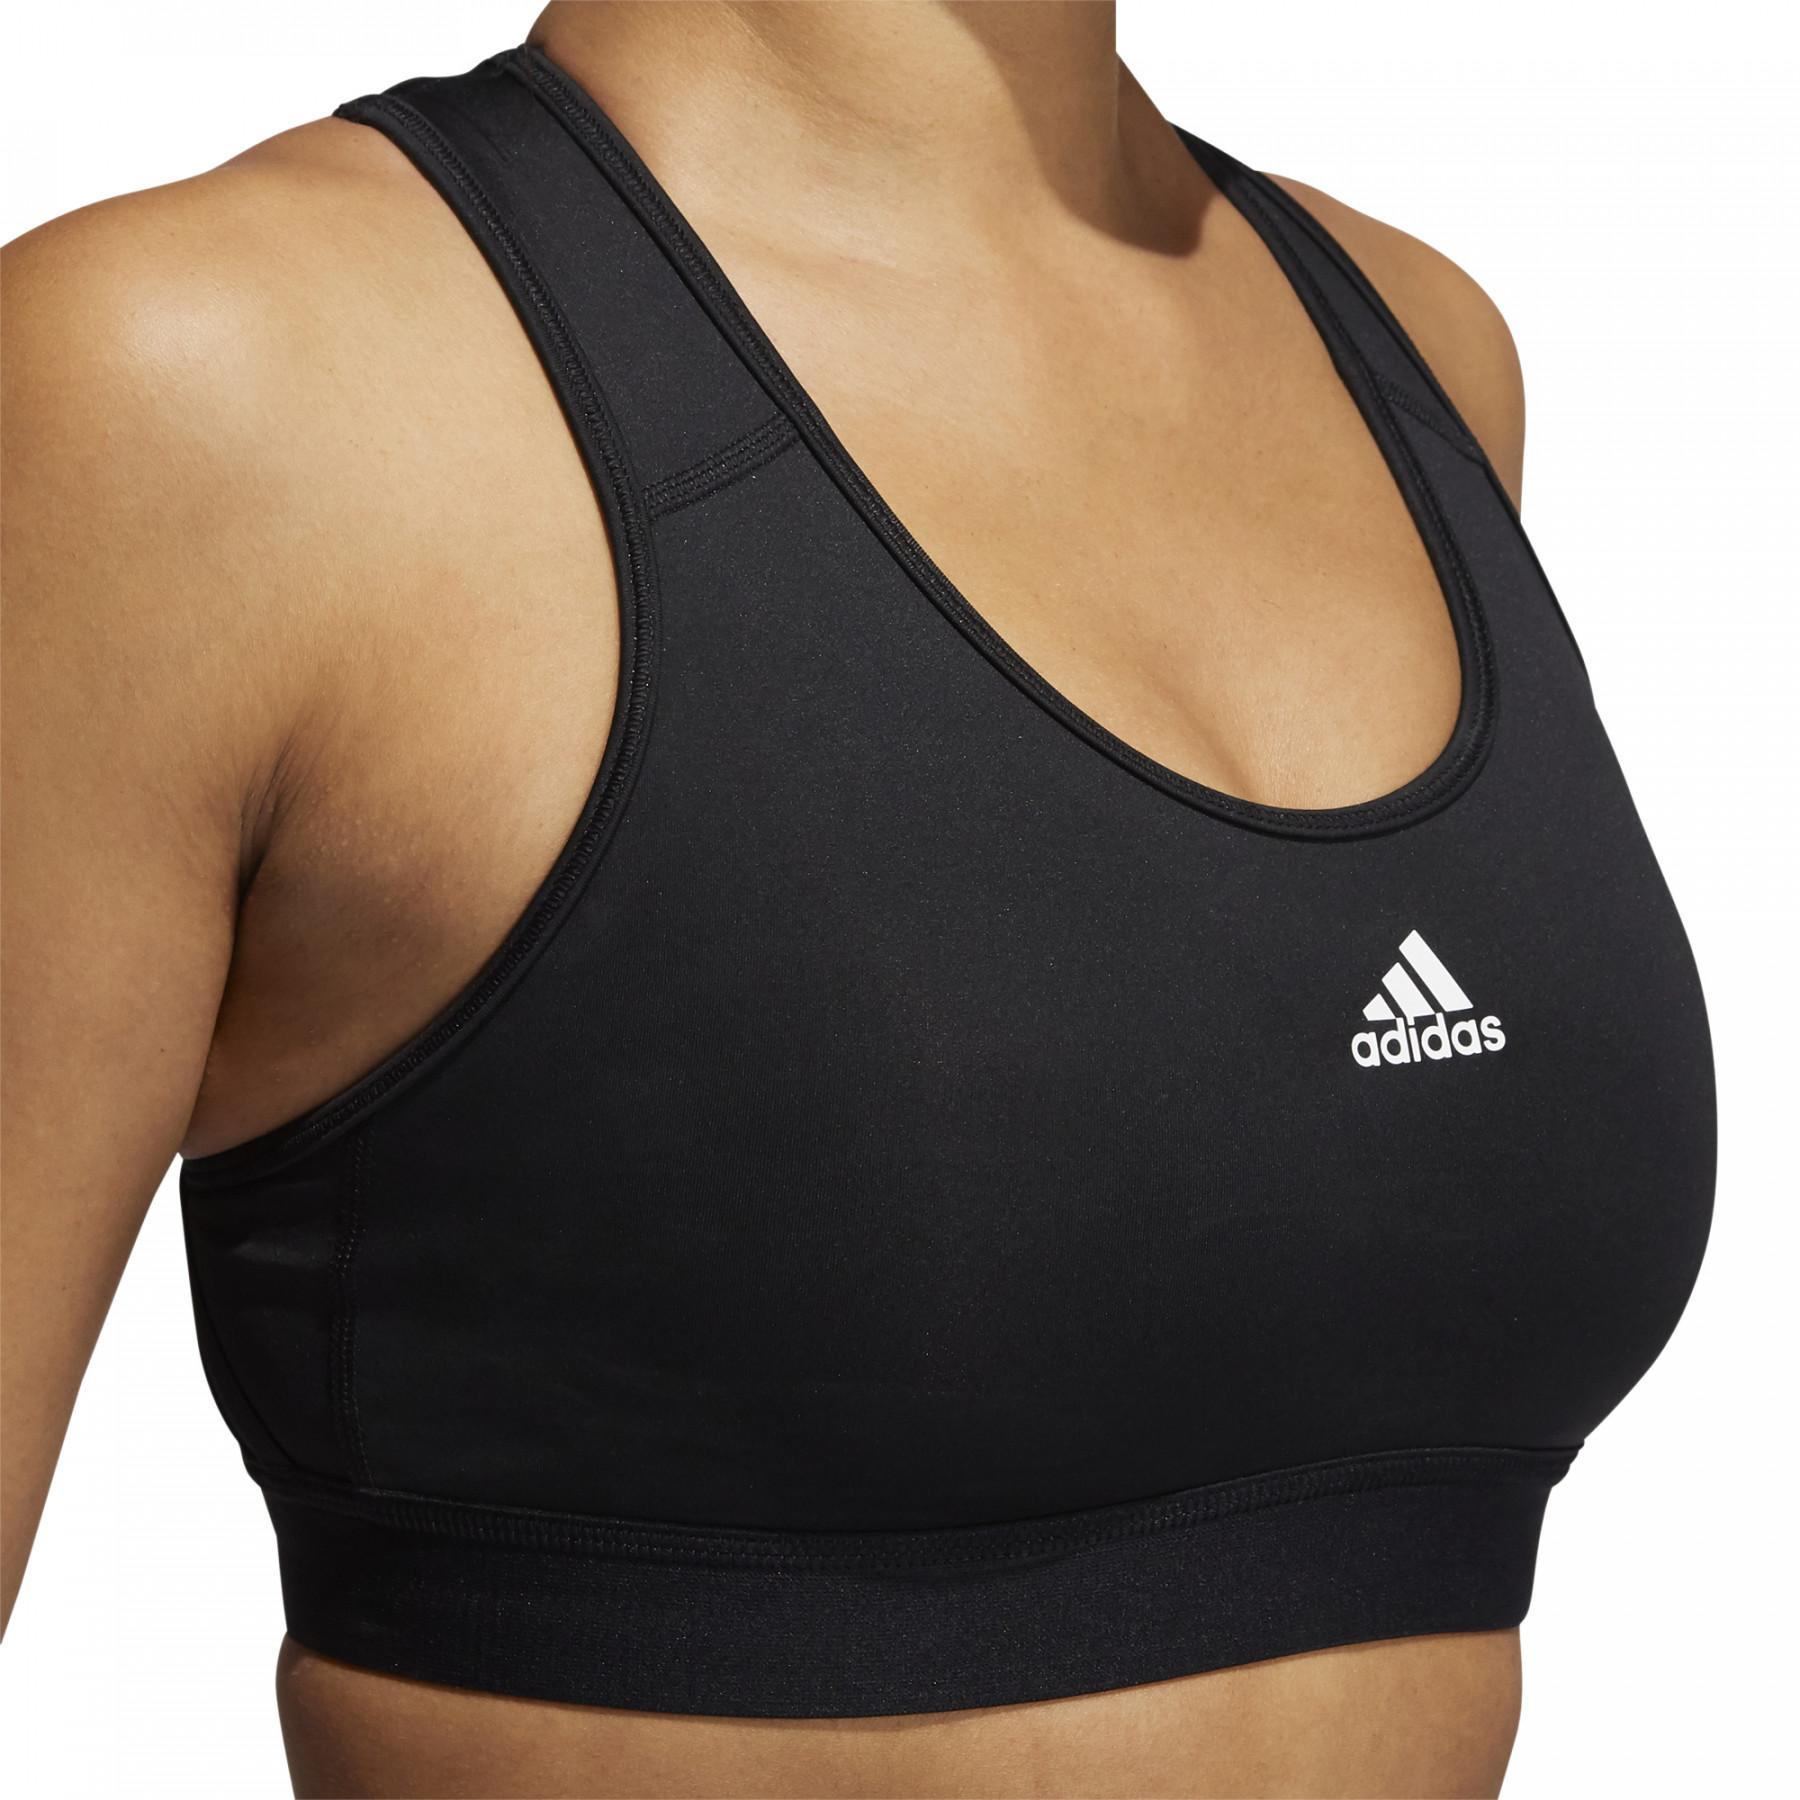 Women's bra adidas Believe This Lace Up